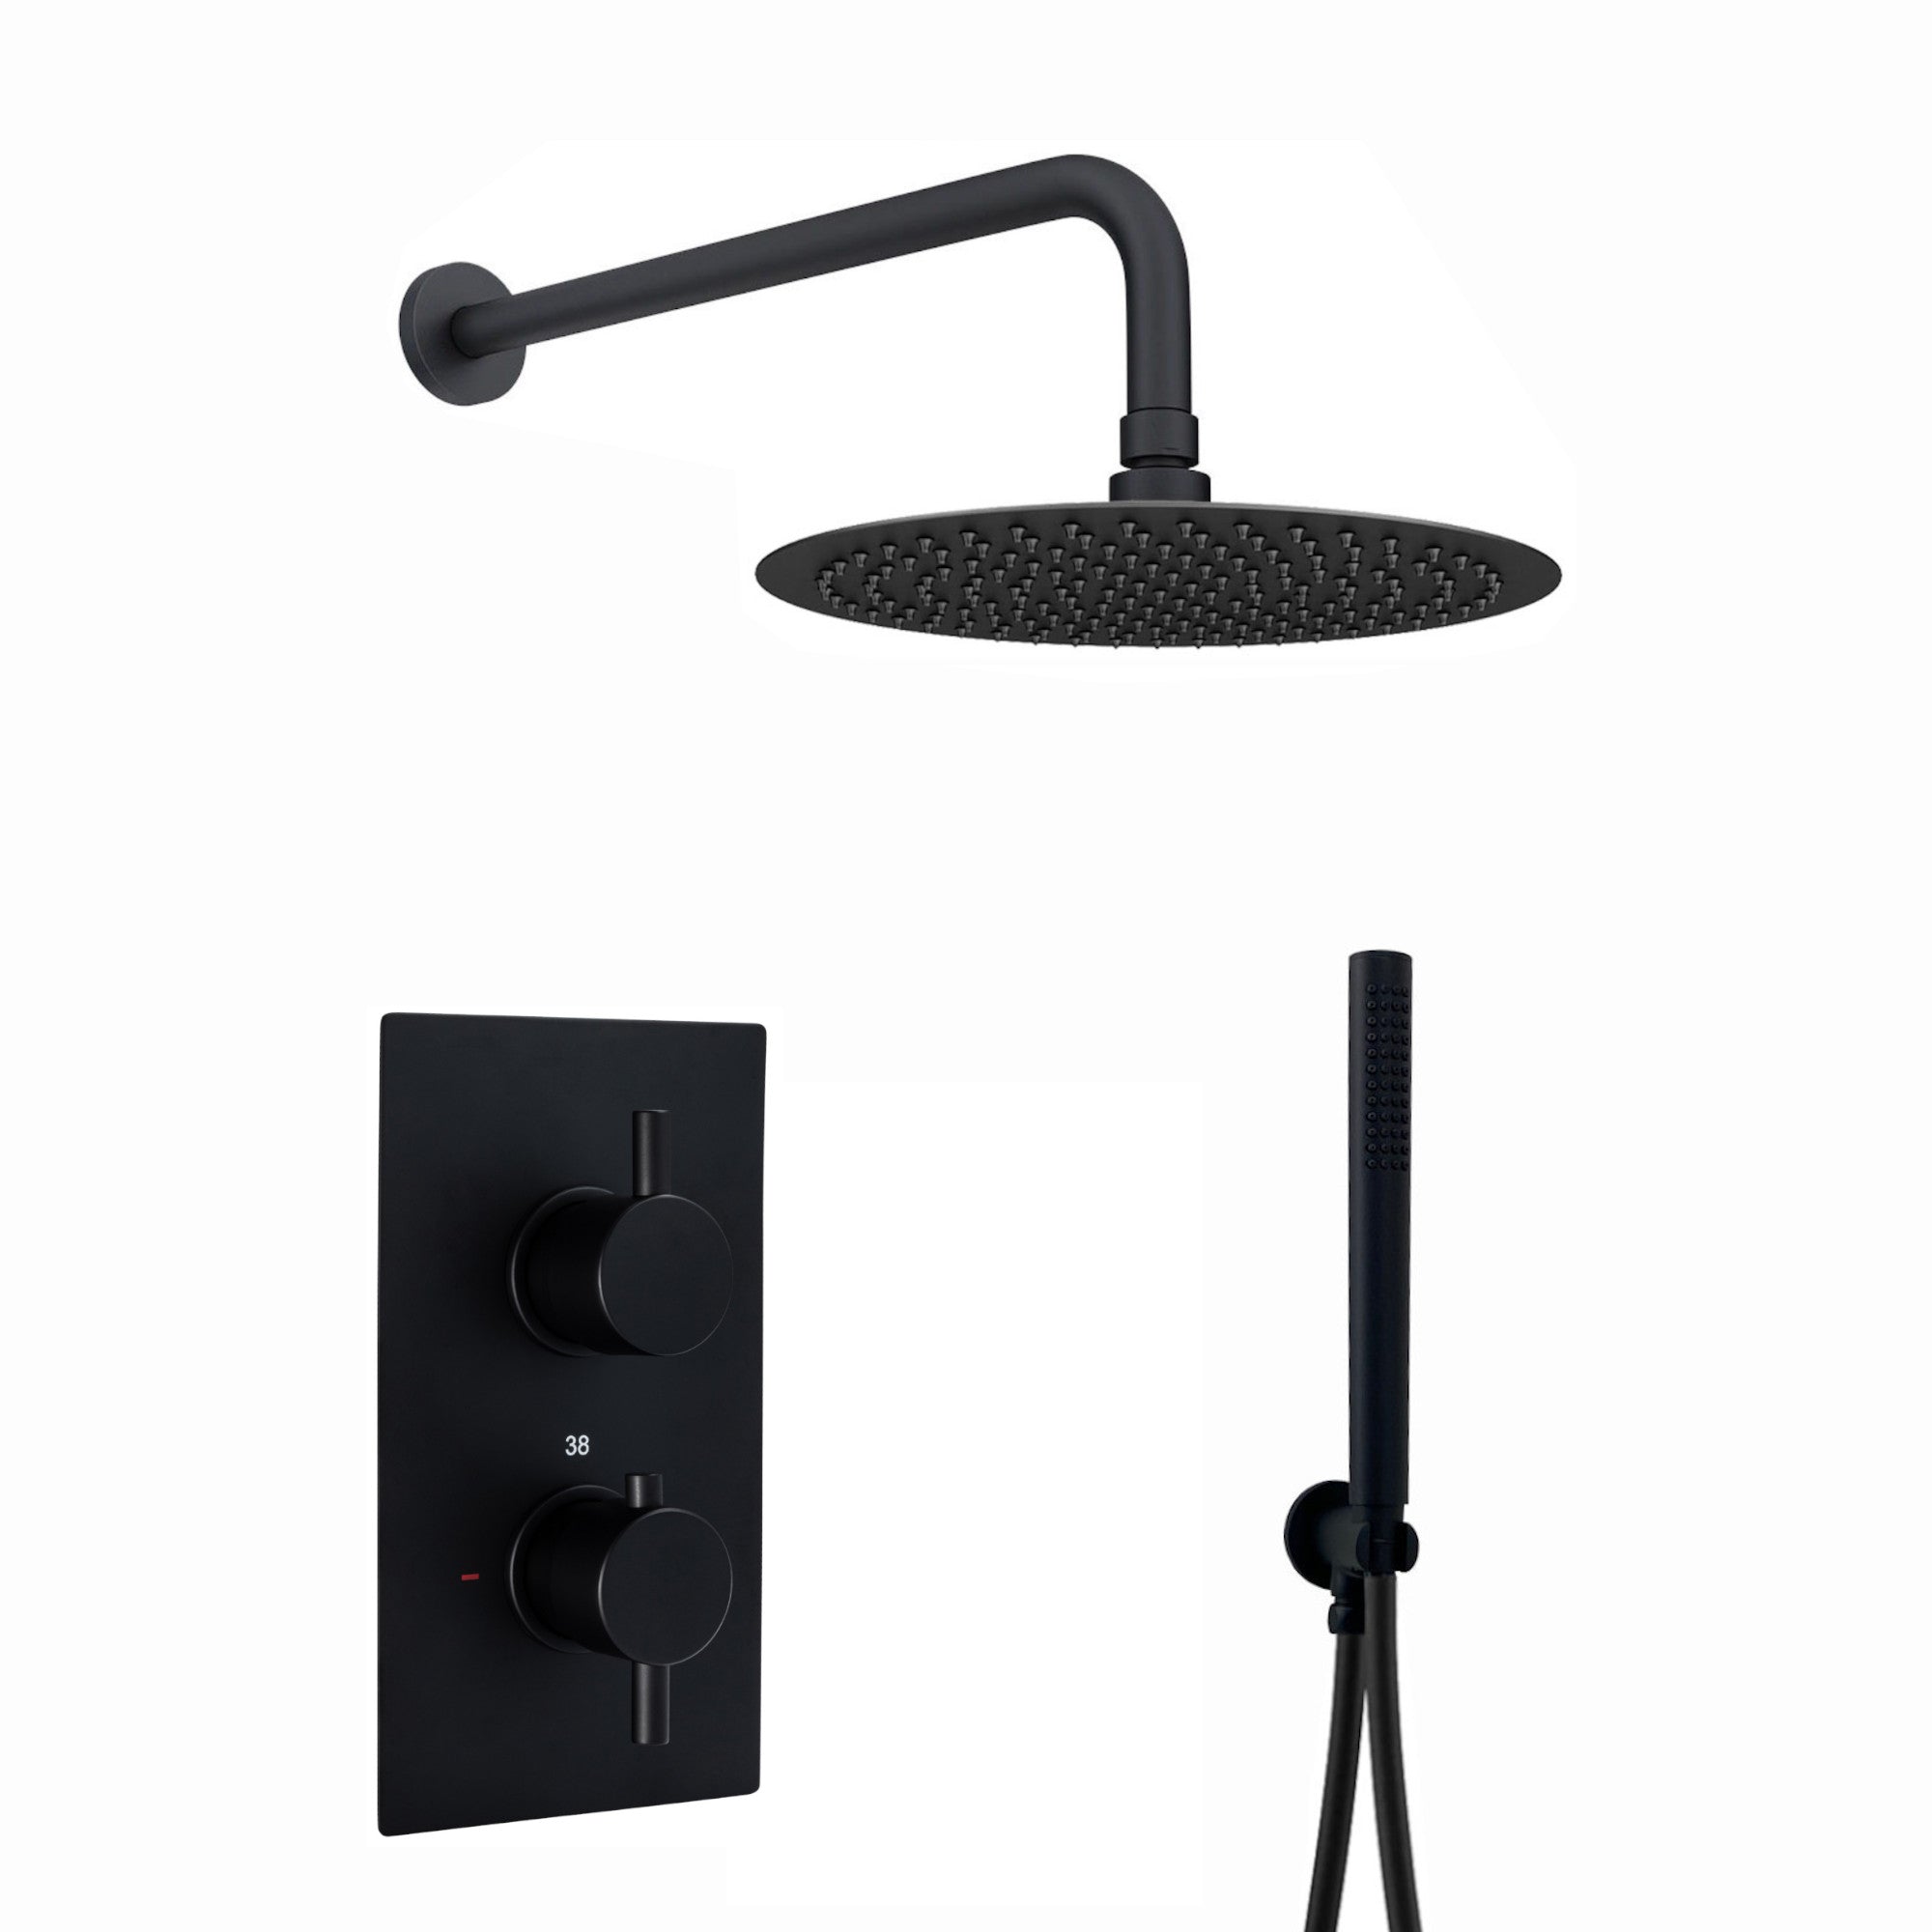 Venice Contemporary Round Concealed Thermostatic Shower Set Incl. Twin Valve, Wall Fixed 8" Shower Head, Handshower Kit - Matte Black (2 Outlet)